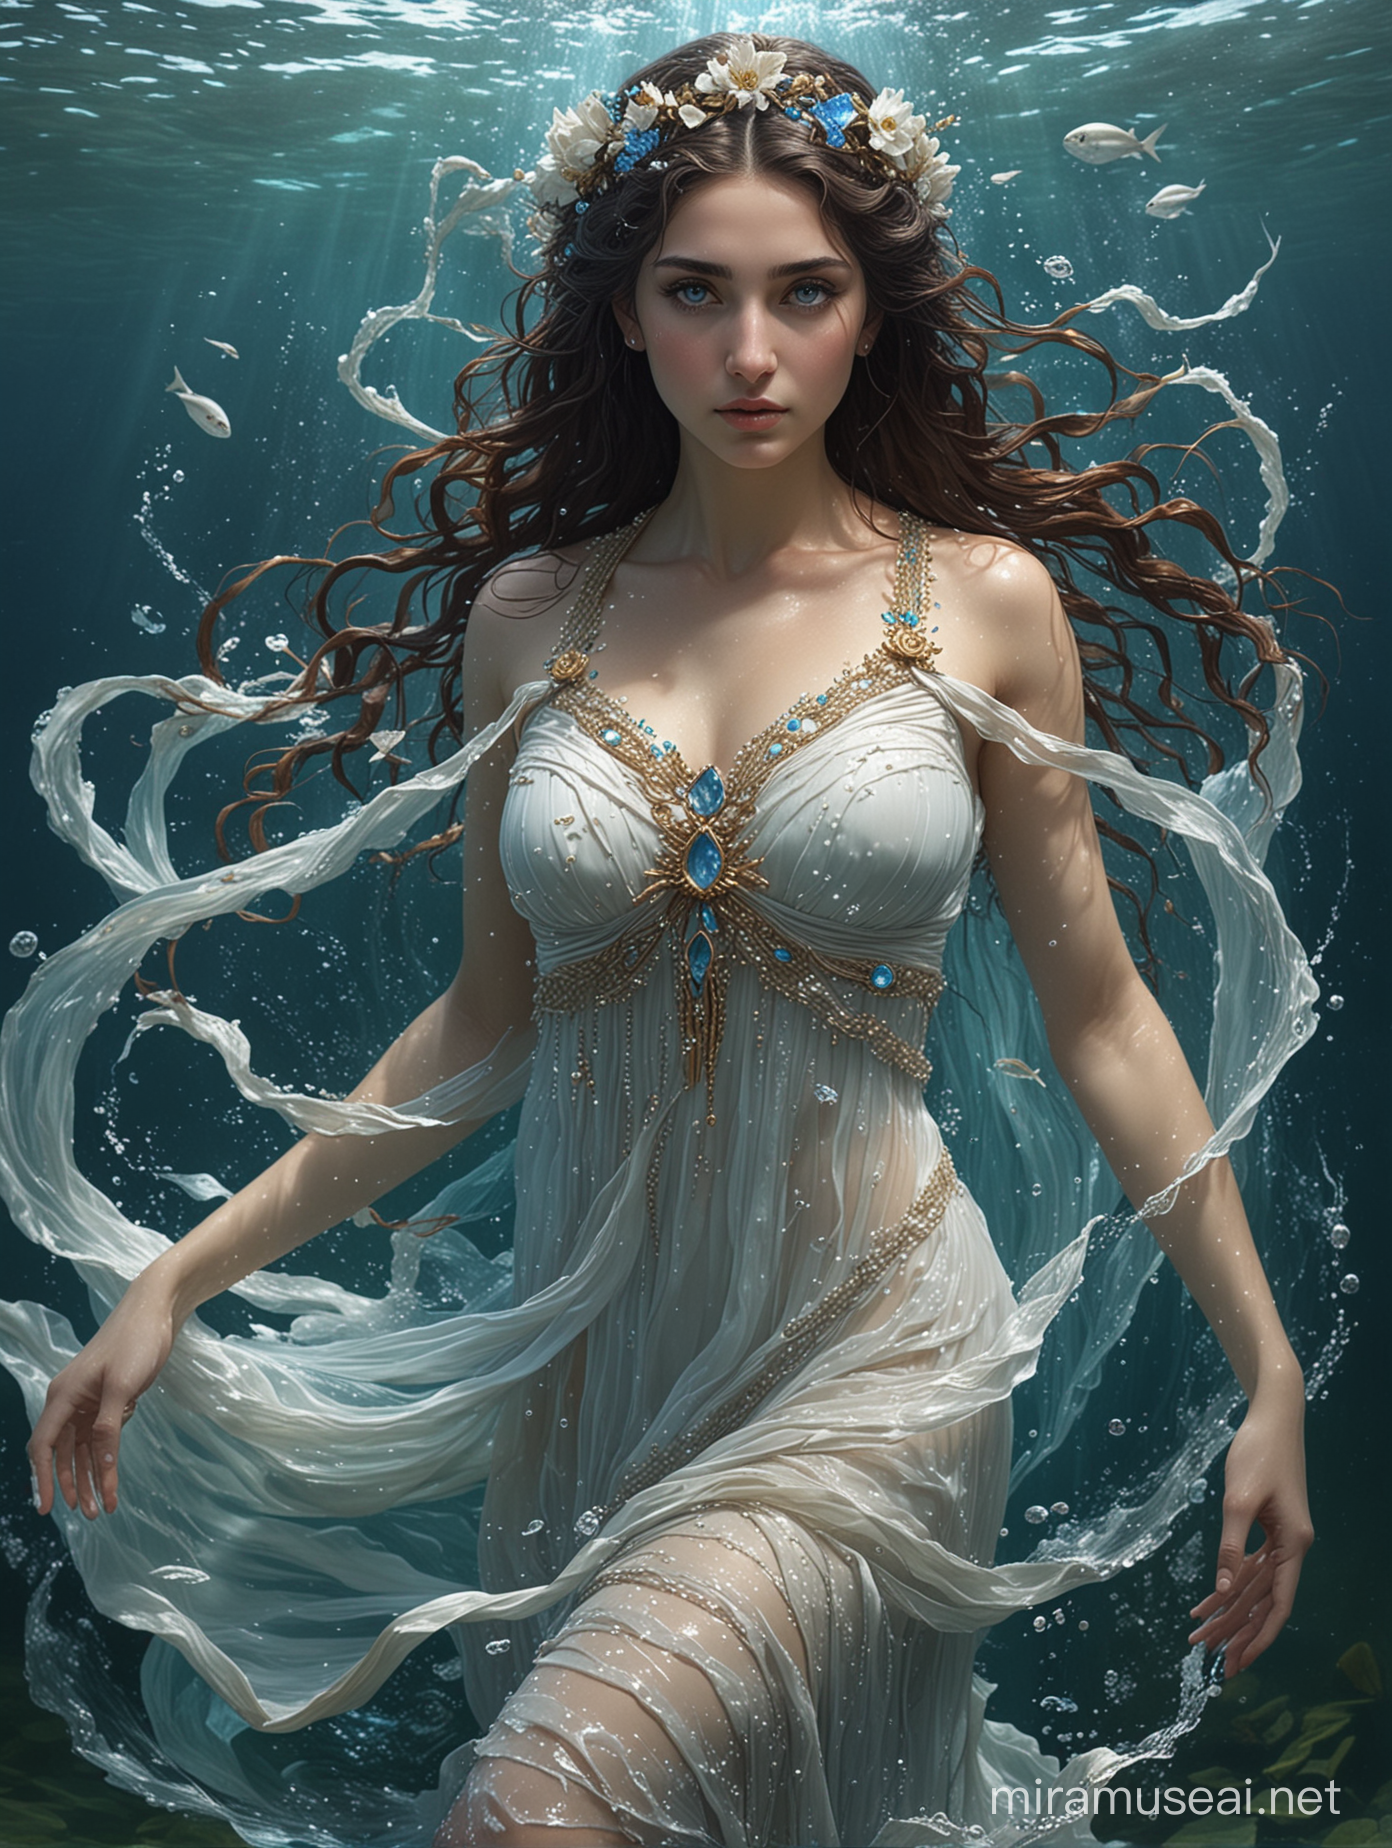 A masterpieced of Kimiya Hosseini as Leucothea, Greek goddess of the sea. She is under the sea, and her Greek dress flows ethereally in the water until it mixes with the water until it disappears. She has has blue eyes.